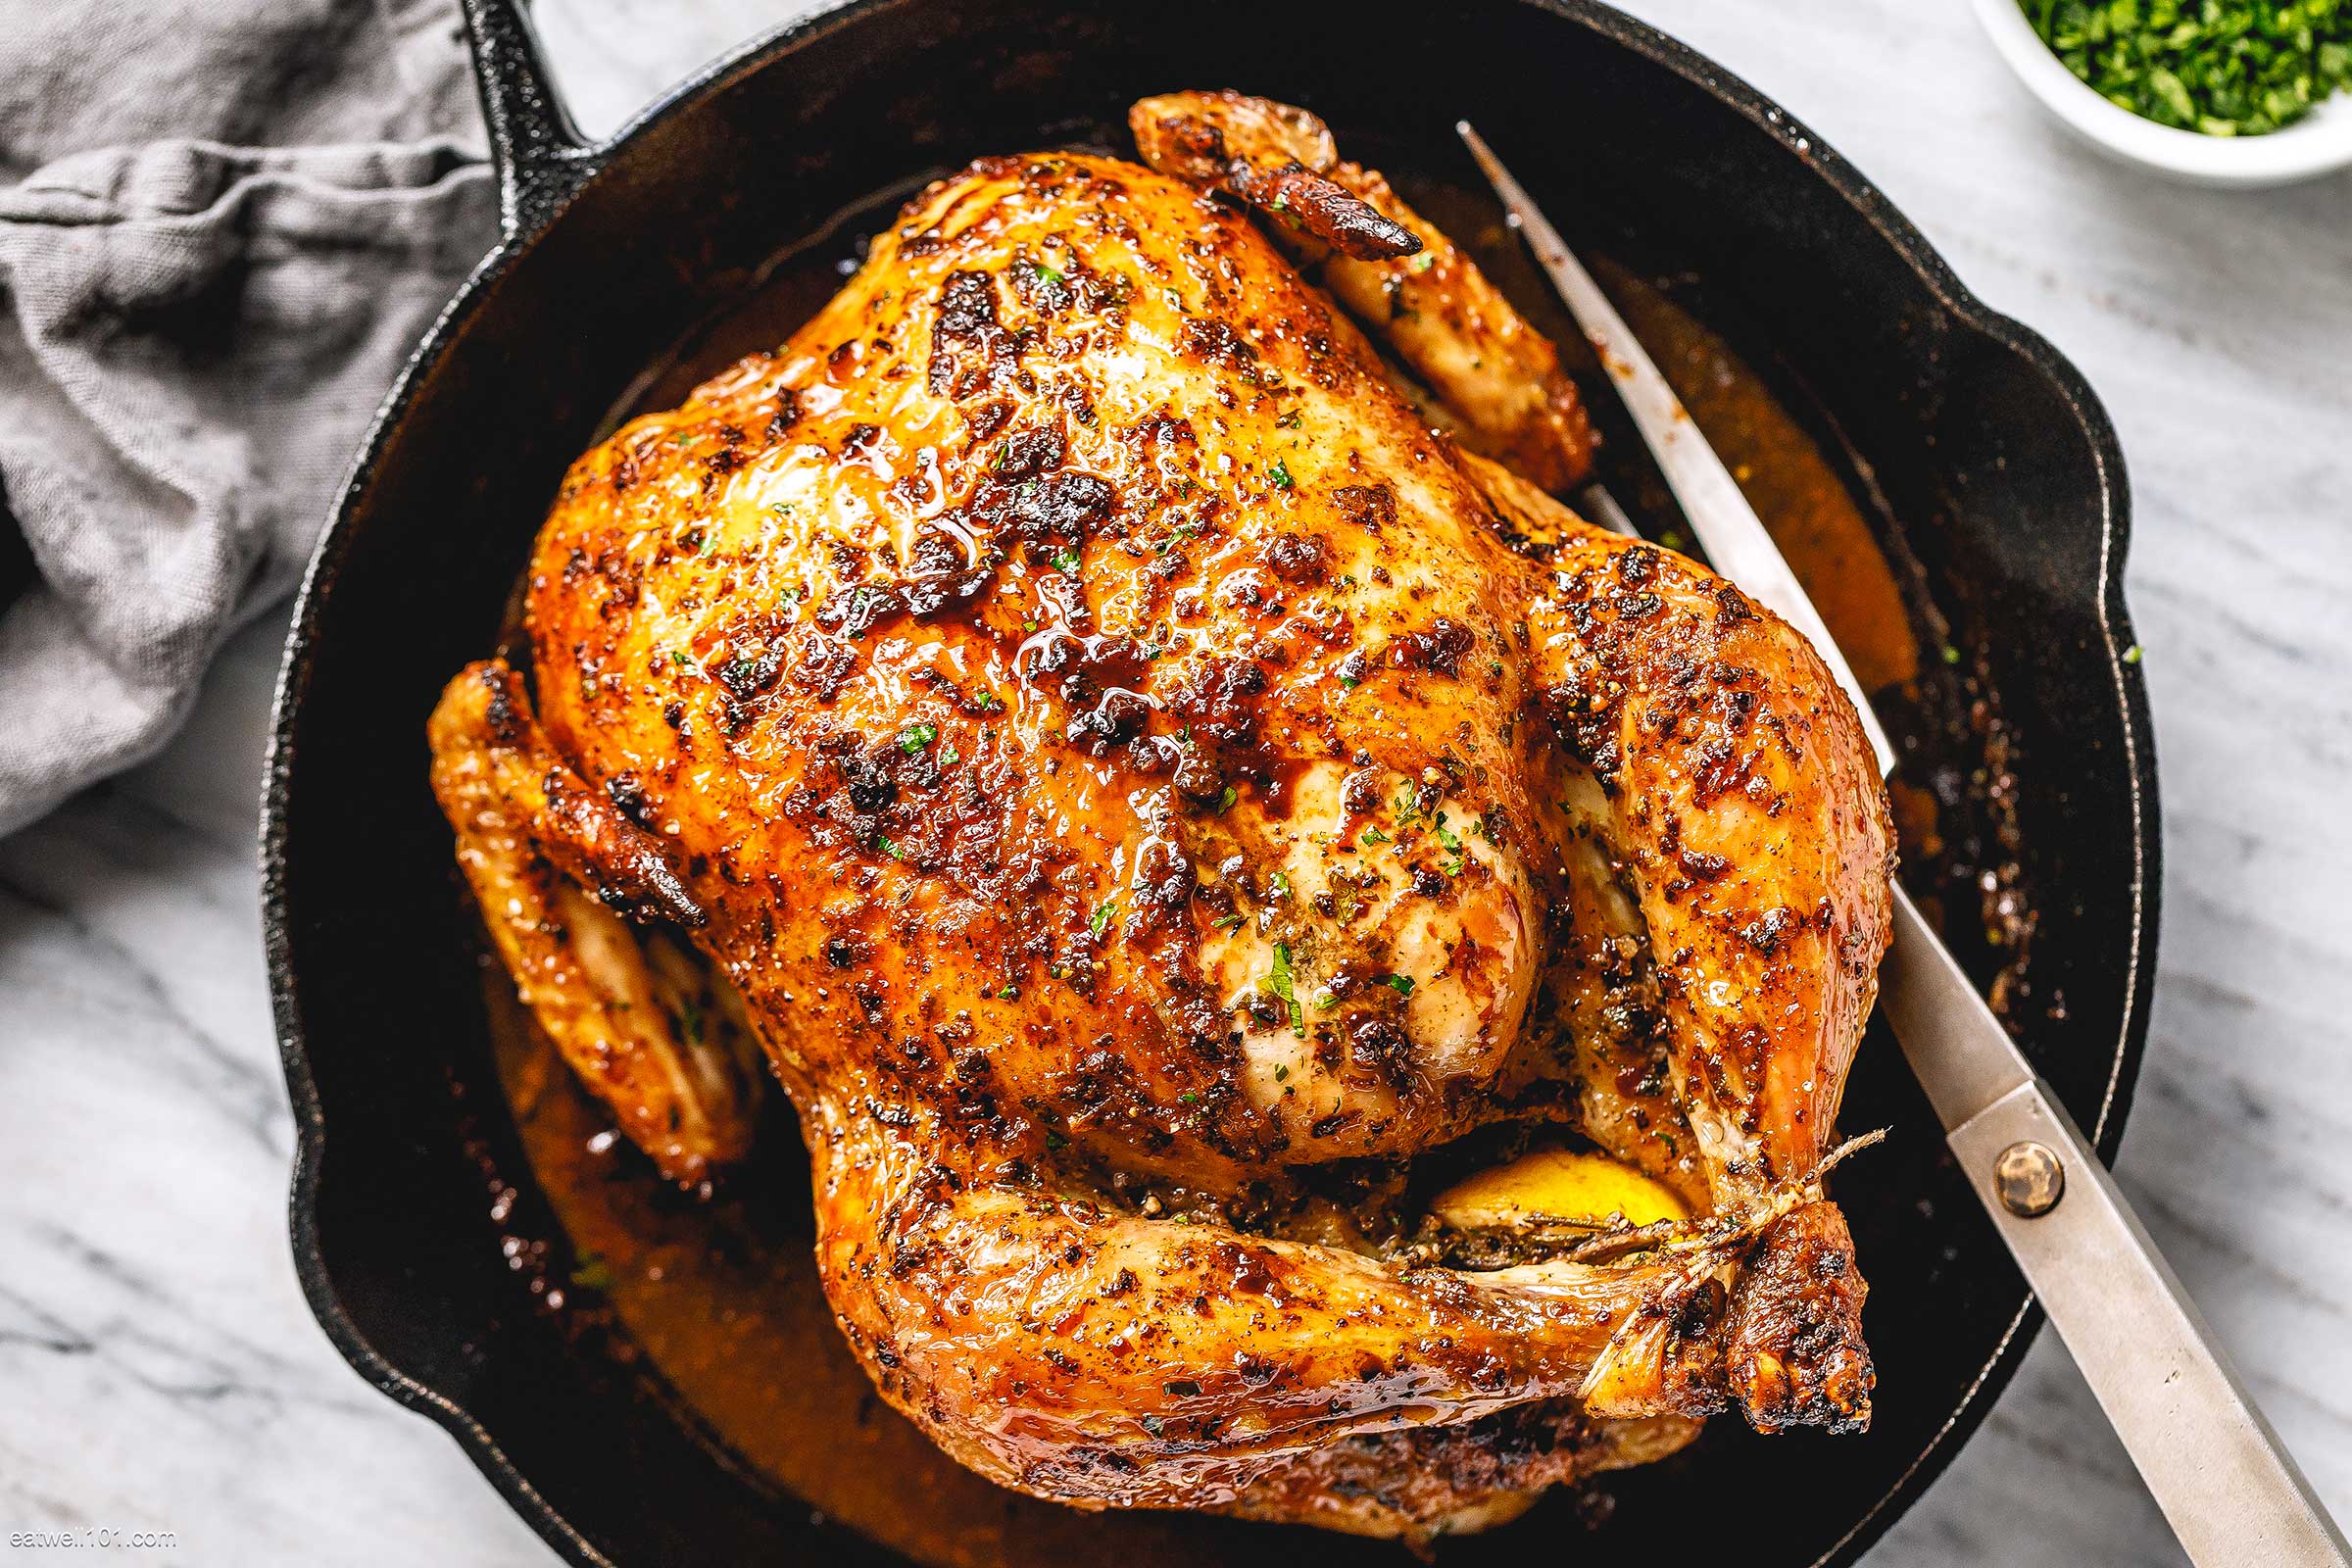 Roasted Chicken with Garlic Herb Butter